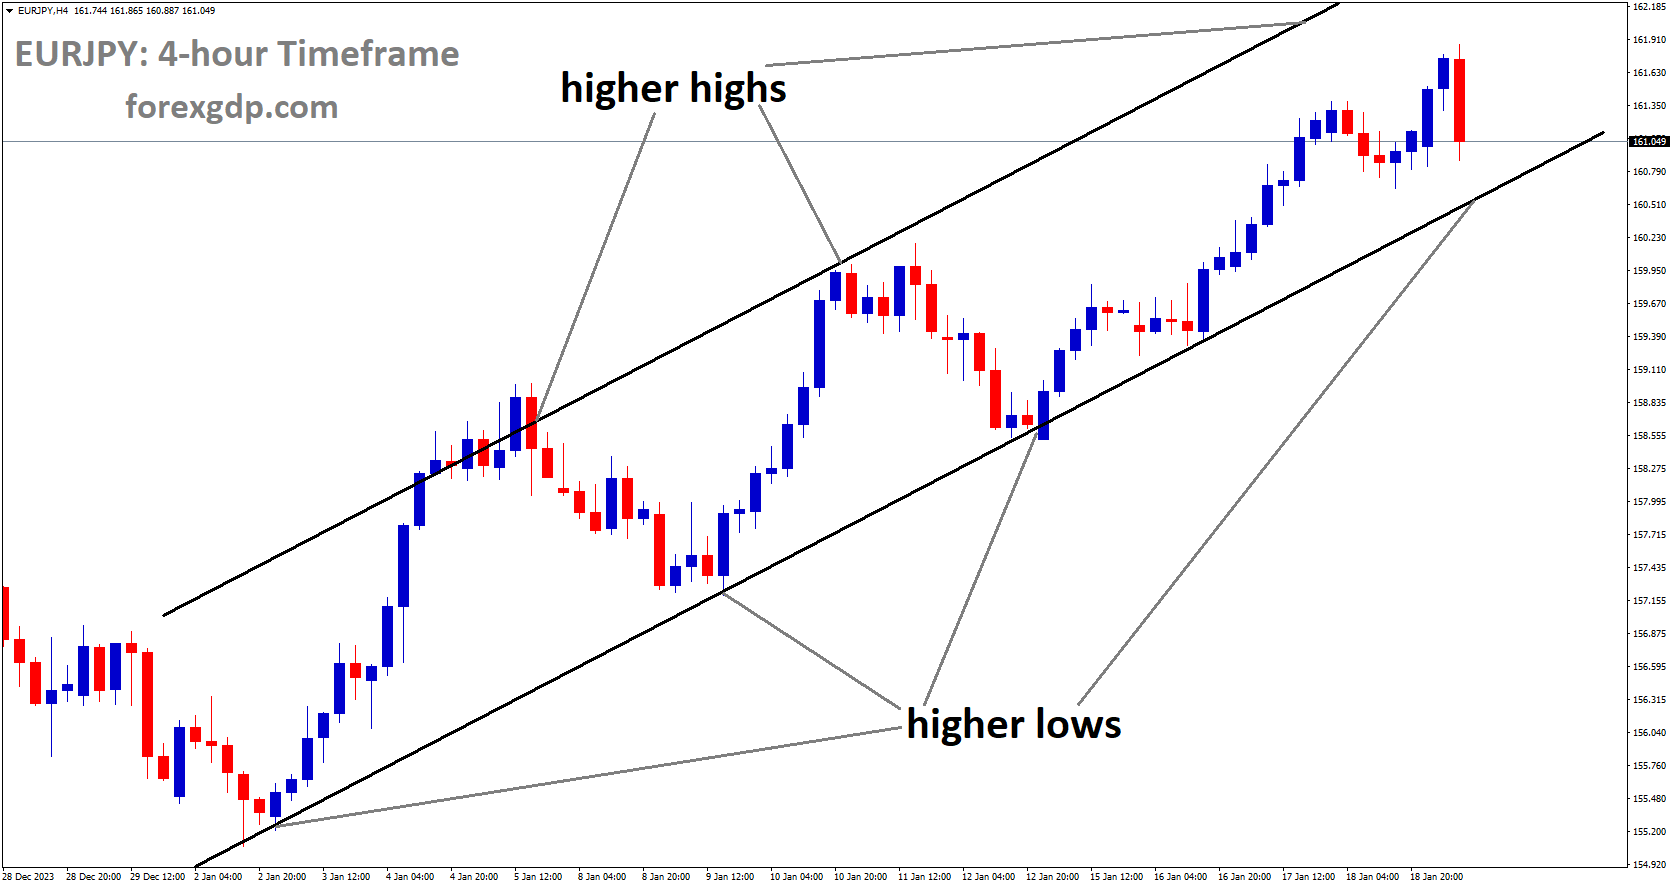 EURJPY is moving in Ascending channel and market has reached higher low area of the channel